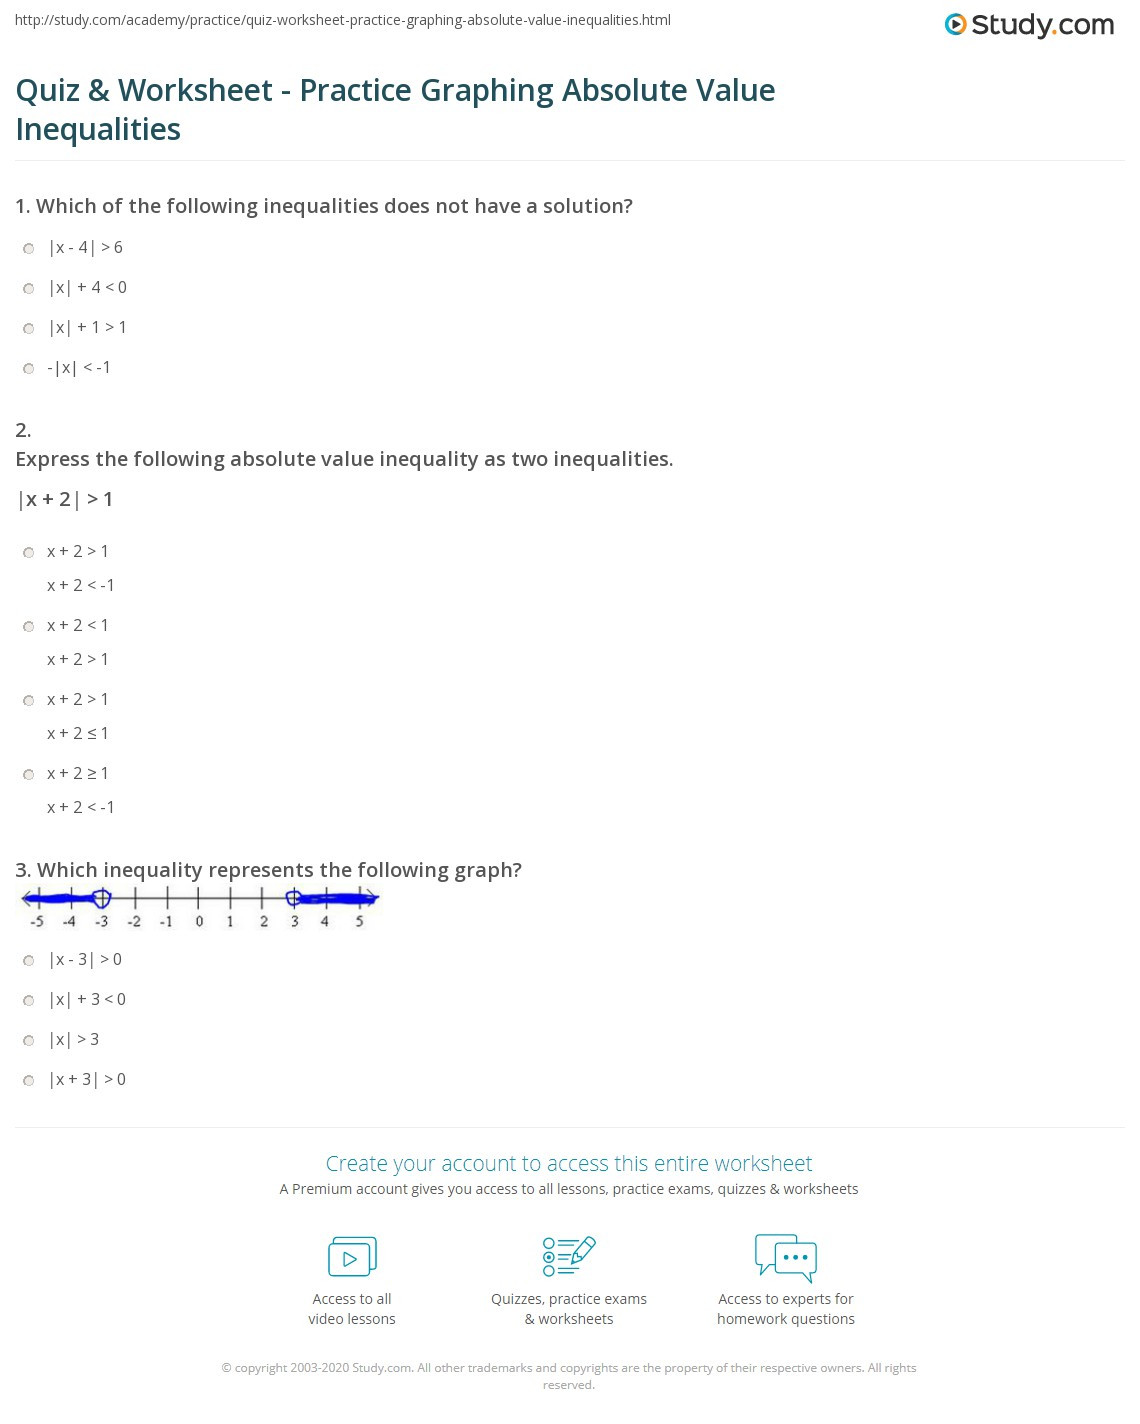 Absolute Value Inequalities Worksheet Answers Quiz &amp; Worksheet Practice Graphing Absolute Value